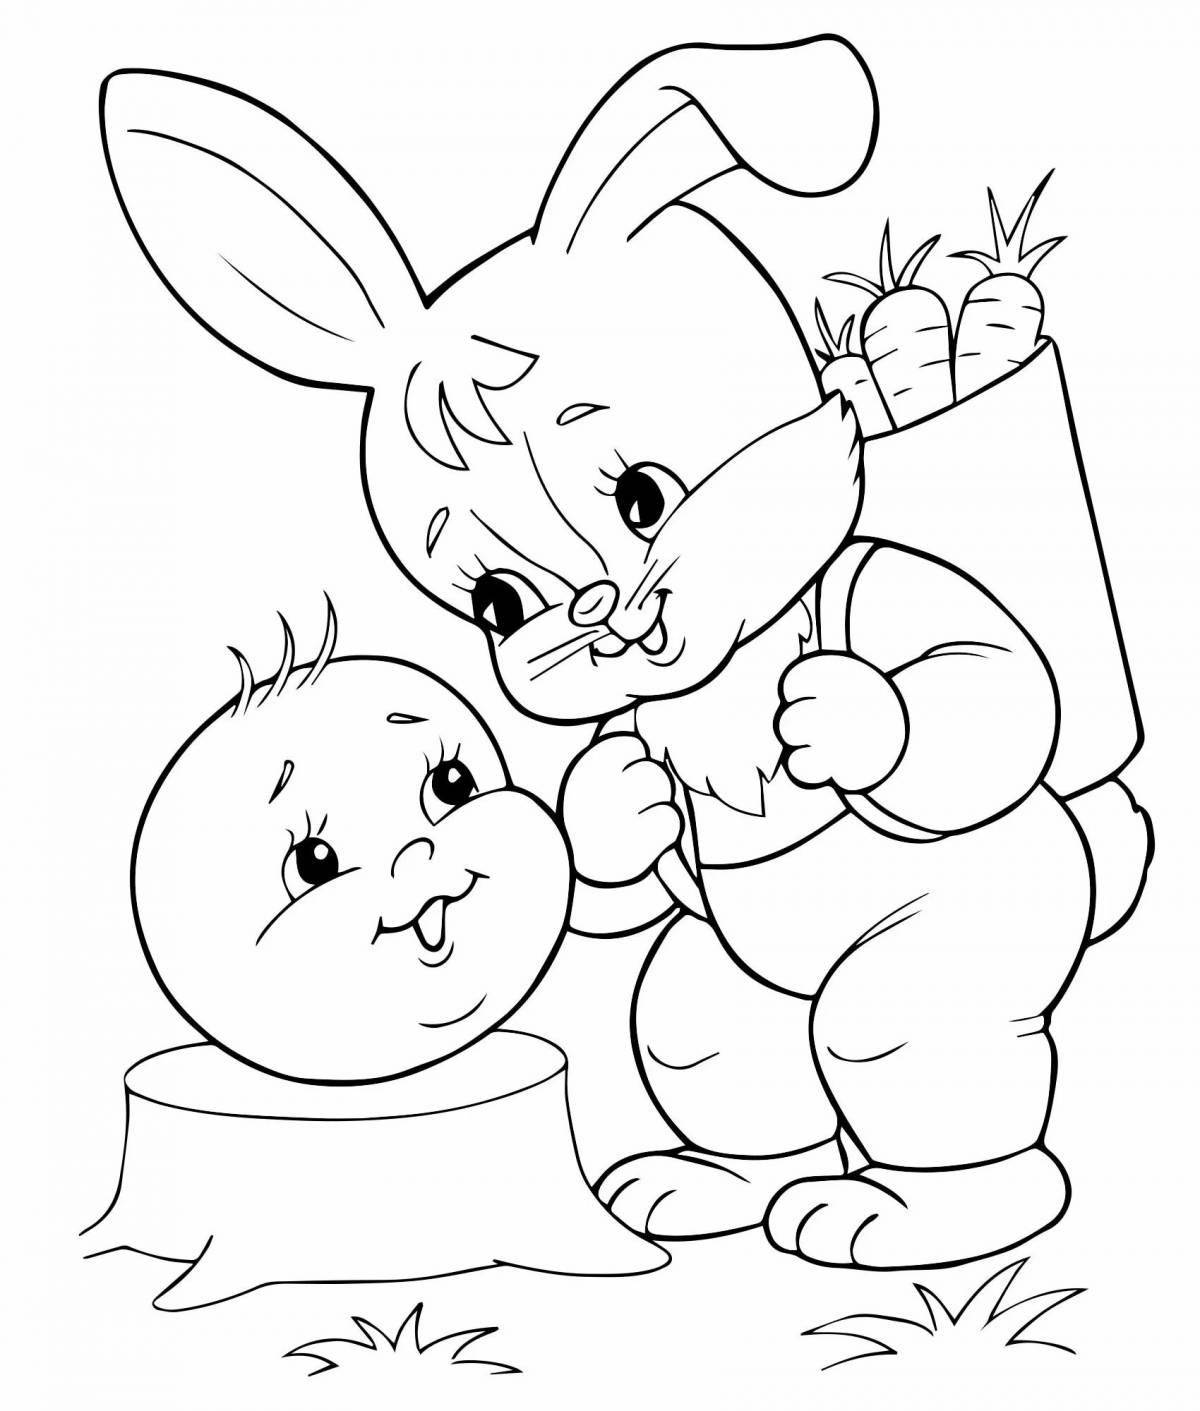 Fairy-tale coloring pages heroes of fairy tales